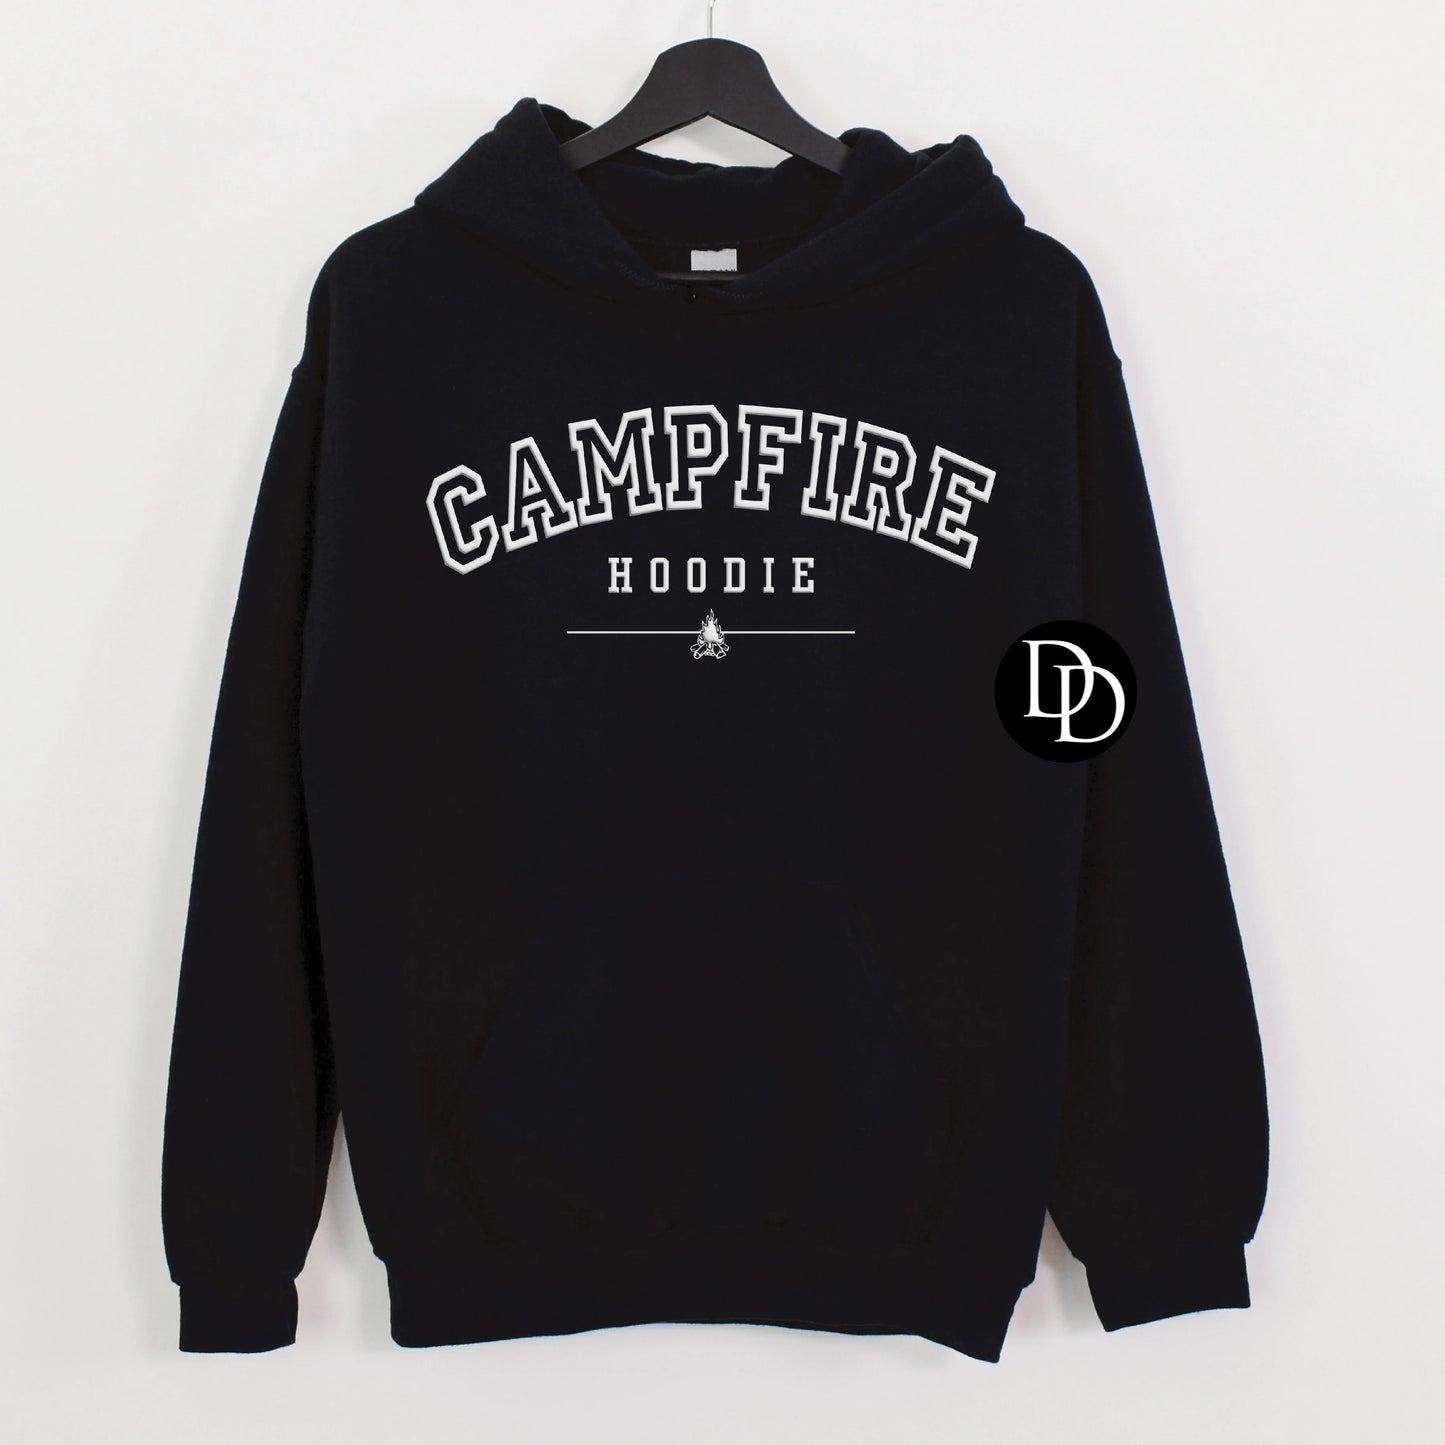 'Campfire Hoodie' Graphic